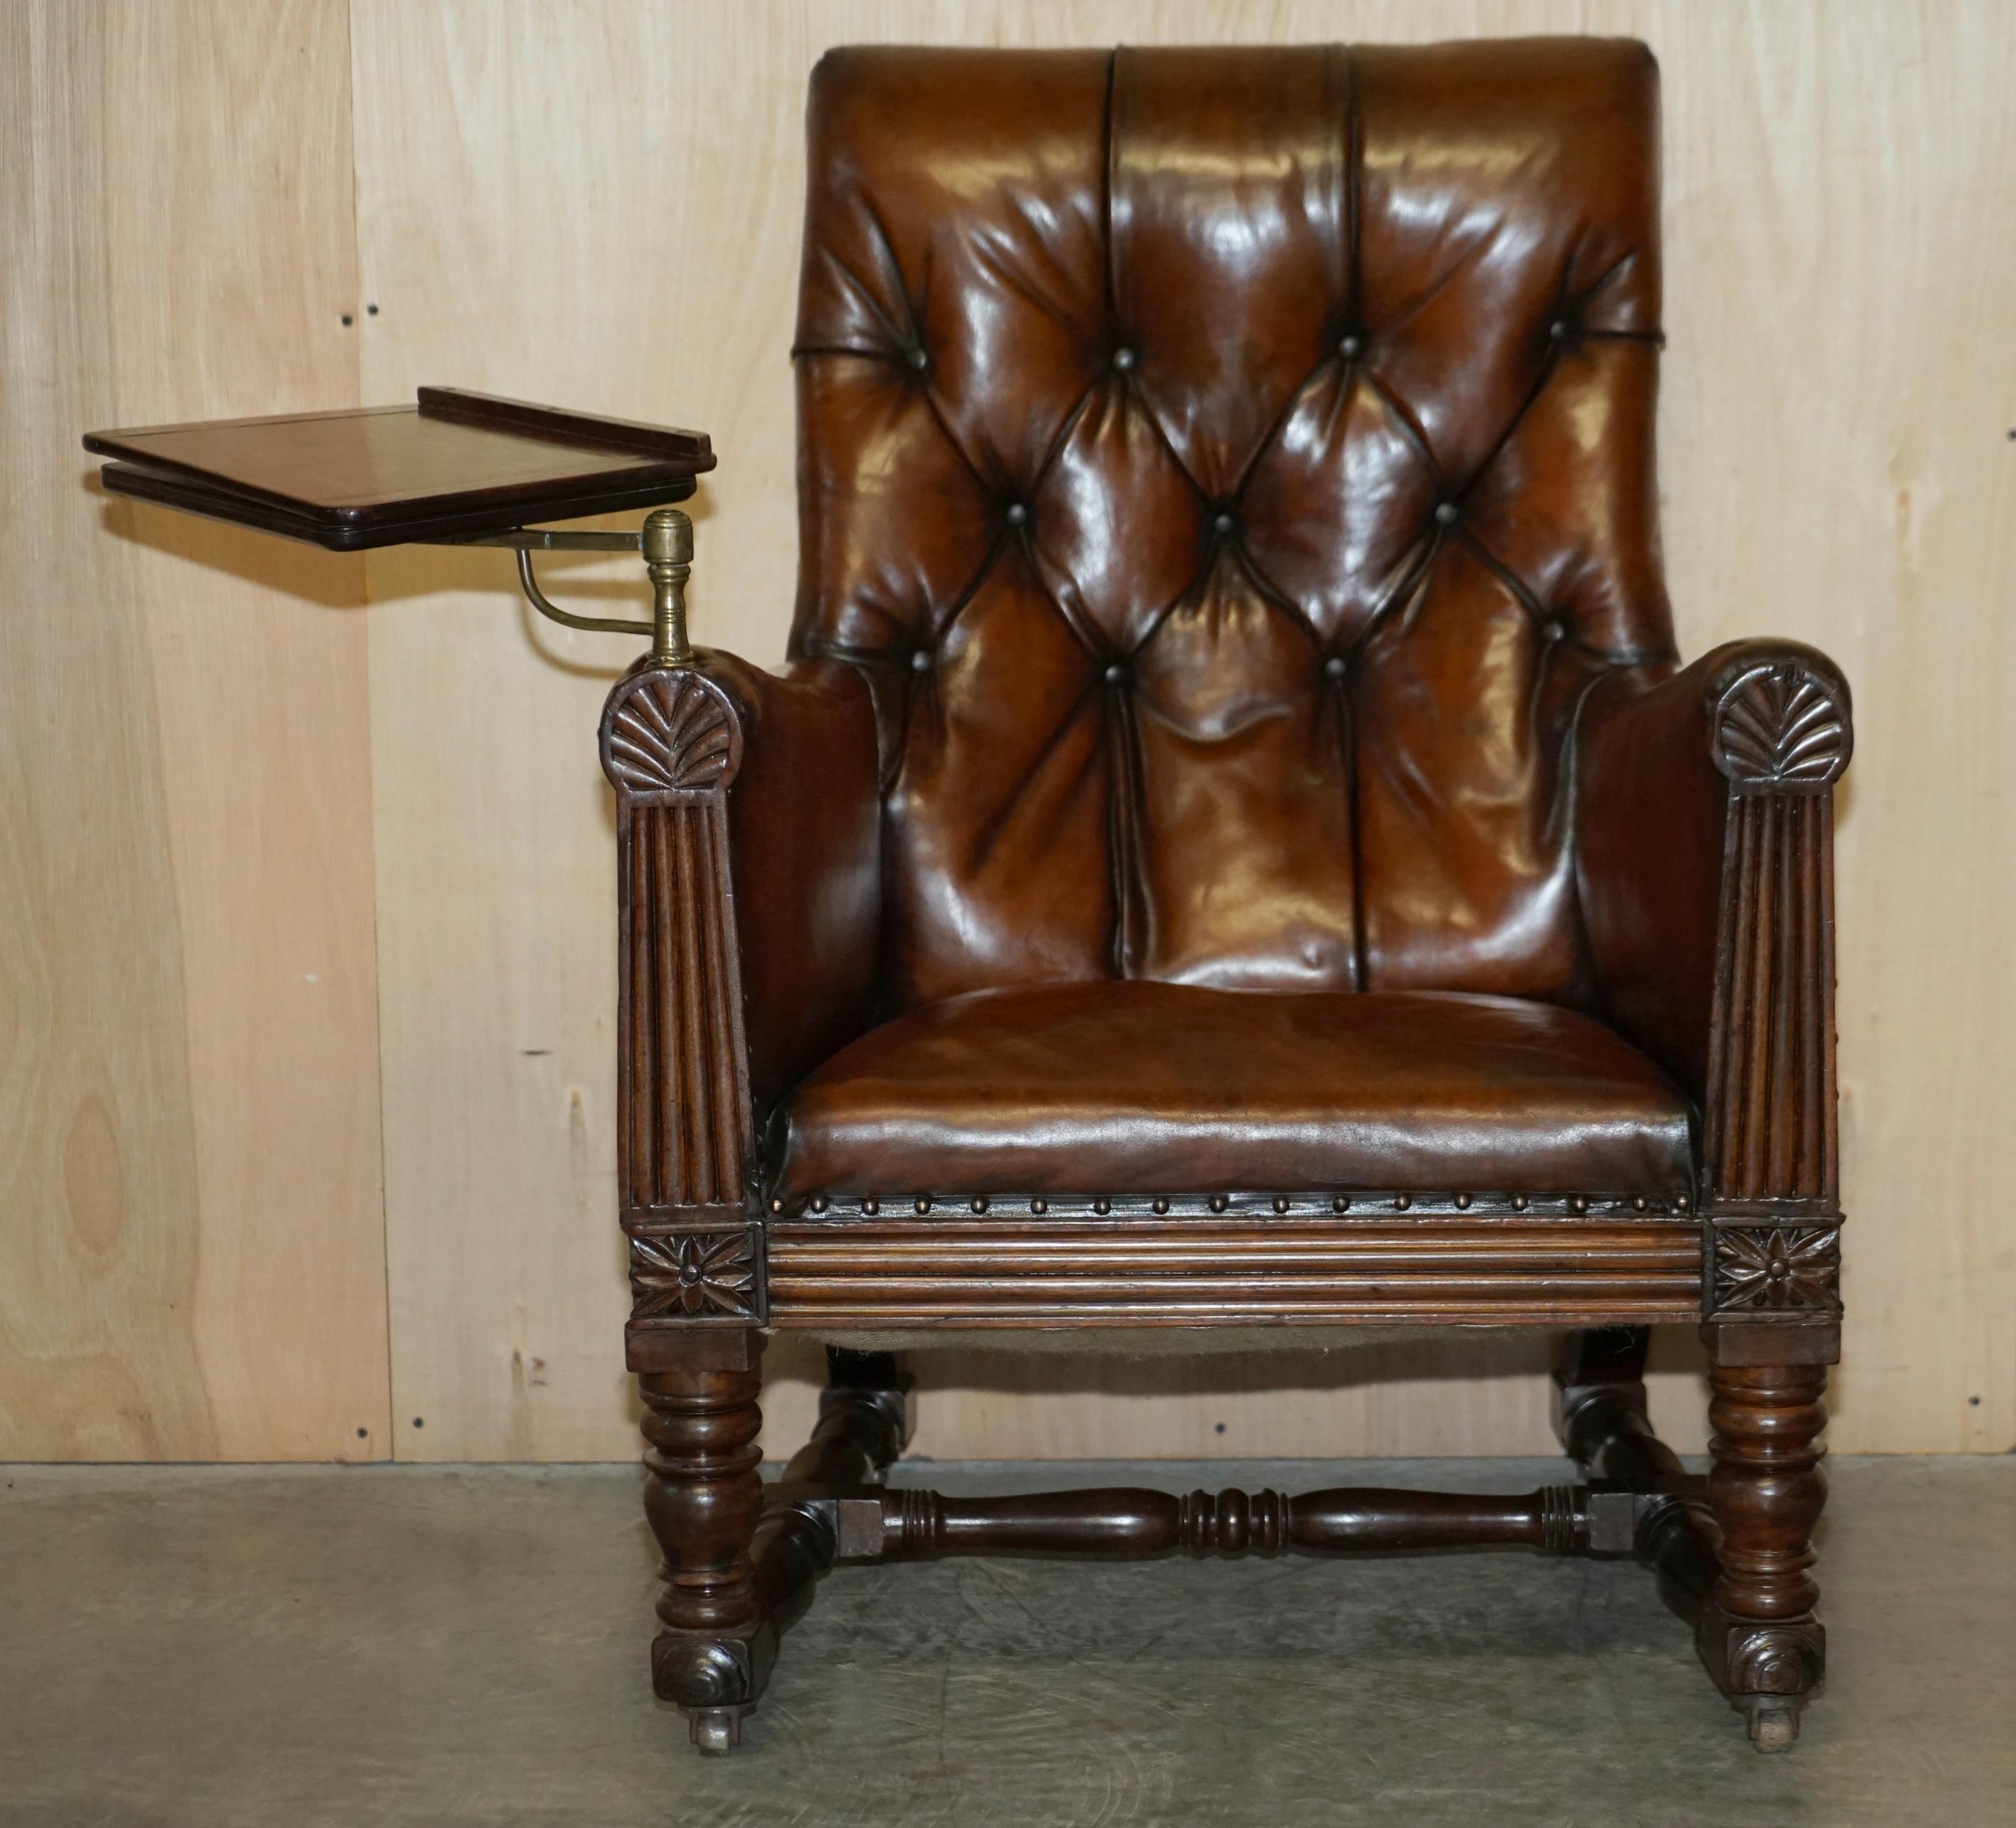 We are delighted to offer for sale this absolutely stunning fully restored hand dyed Cigar brown leather, period Regency Chesterfield Library armchair complete with original mahogany & brass reading slope.

A very good looking and classily